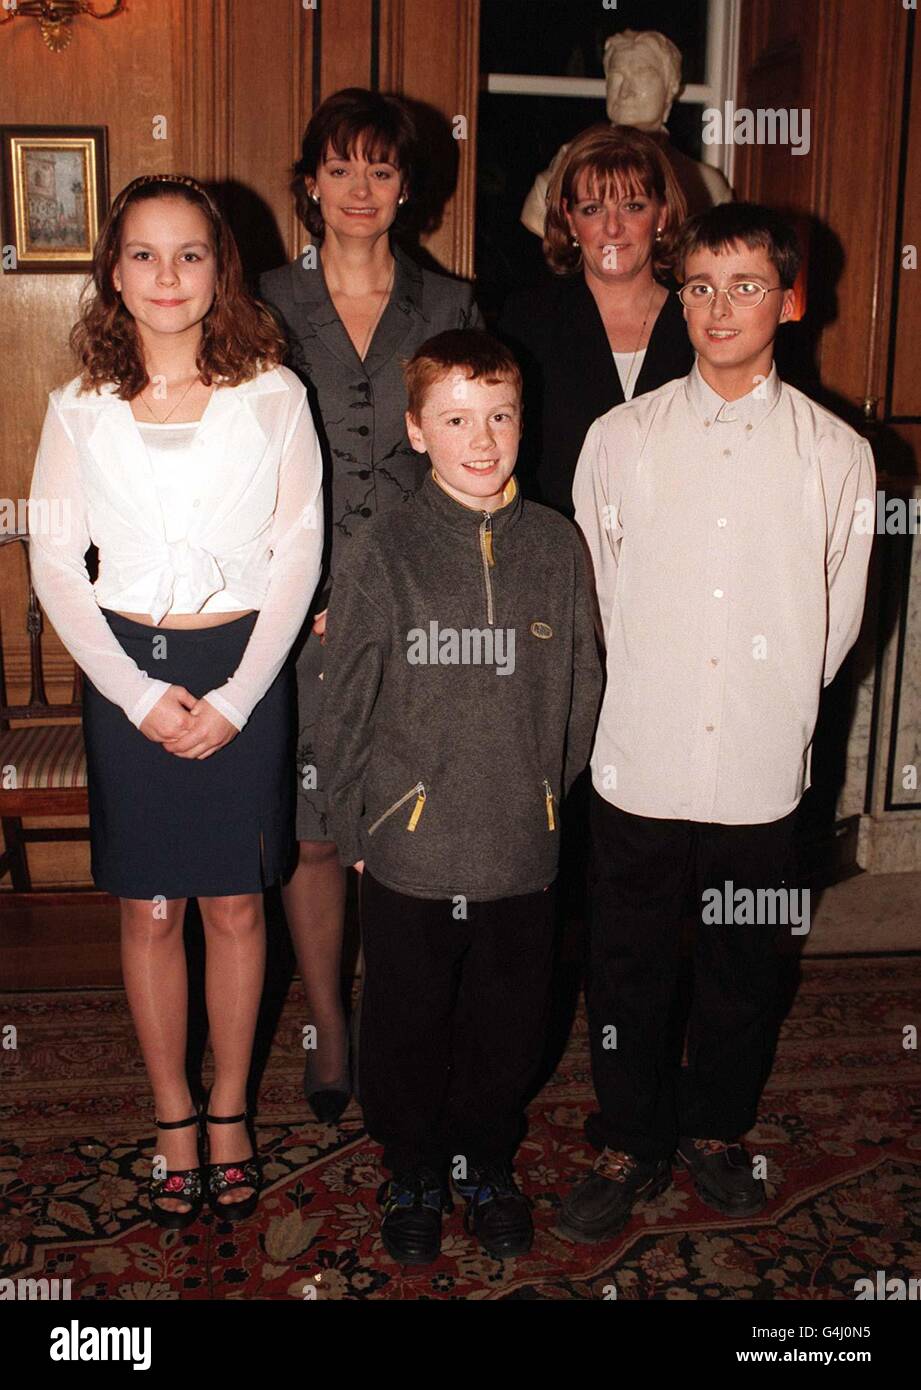 Cherie Blair, wife of Prime Minister Tony Blair, with Dawn Illsley, representing Eric Illsley, MP for Barnsley Central, and local children (l to r) Donna Young, Conor Carroll and Oliver Geldart, at a children's tea party in 10 Downing Street hosted by Mrs Blair. Stock Photo